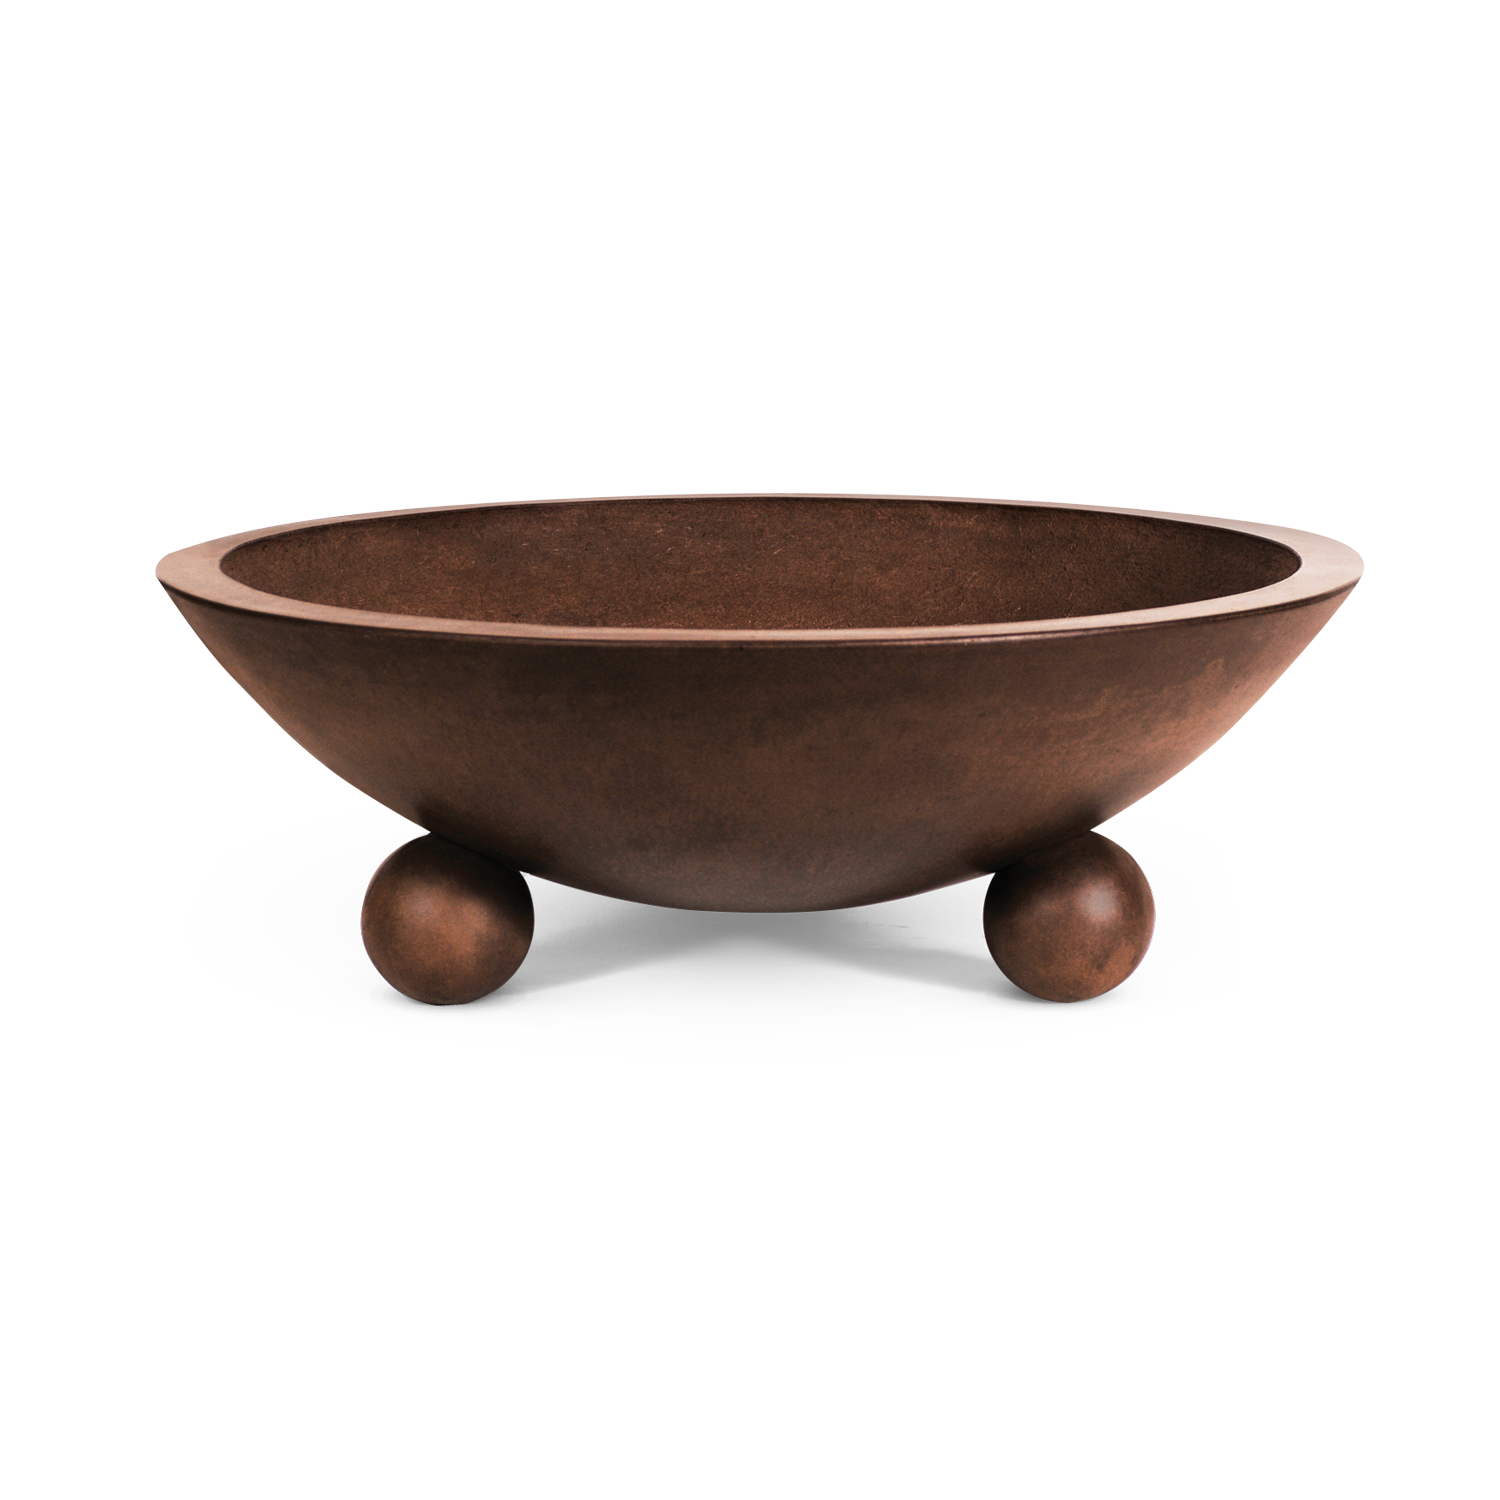 Biltmore Fire Bowl Product Image